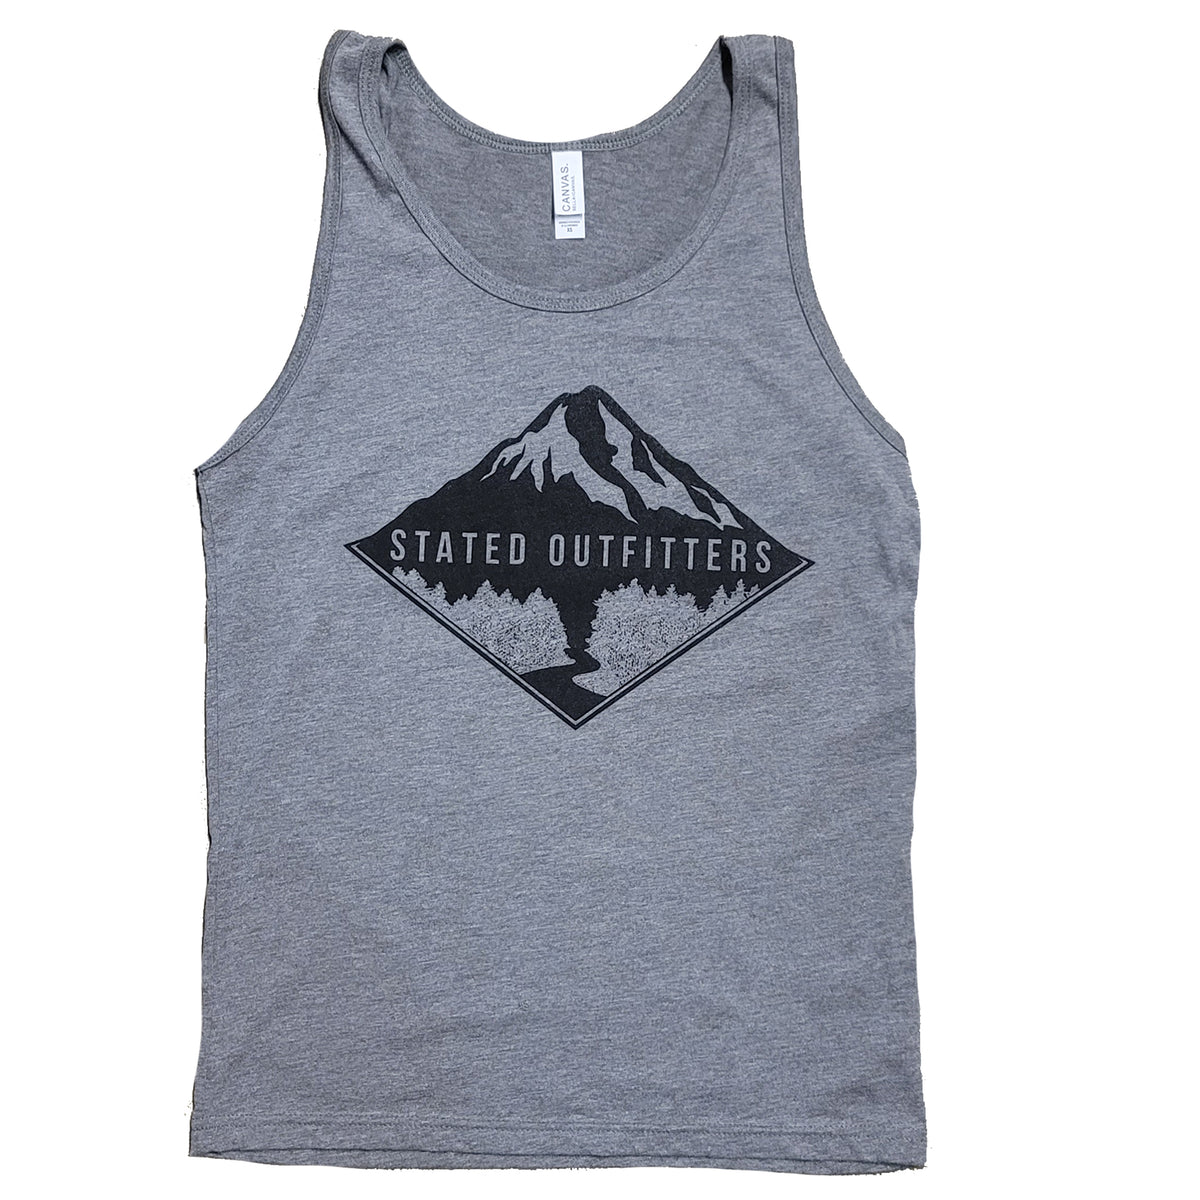 Stated Outfitters Logo Tank